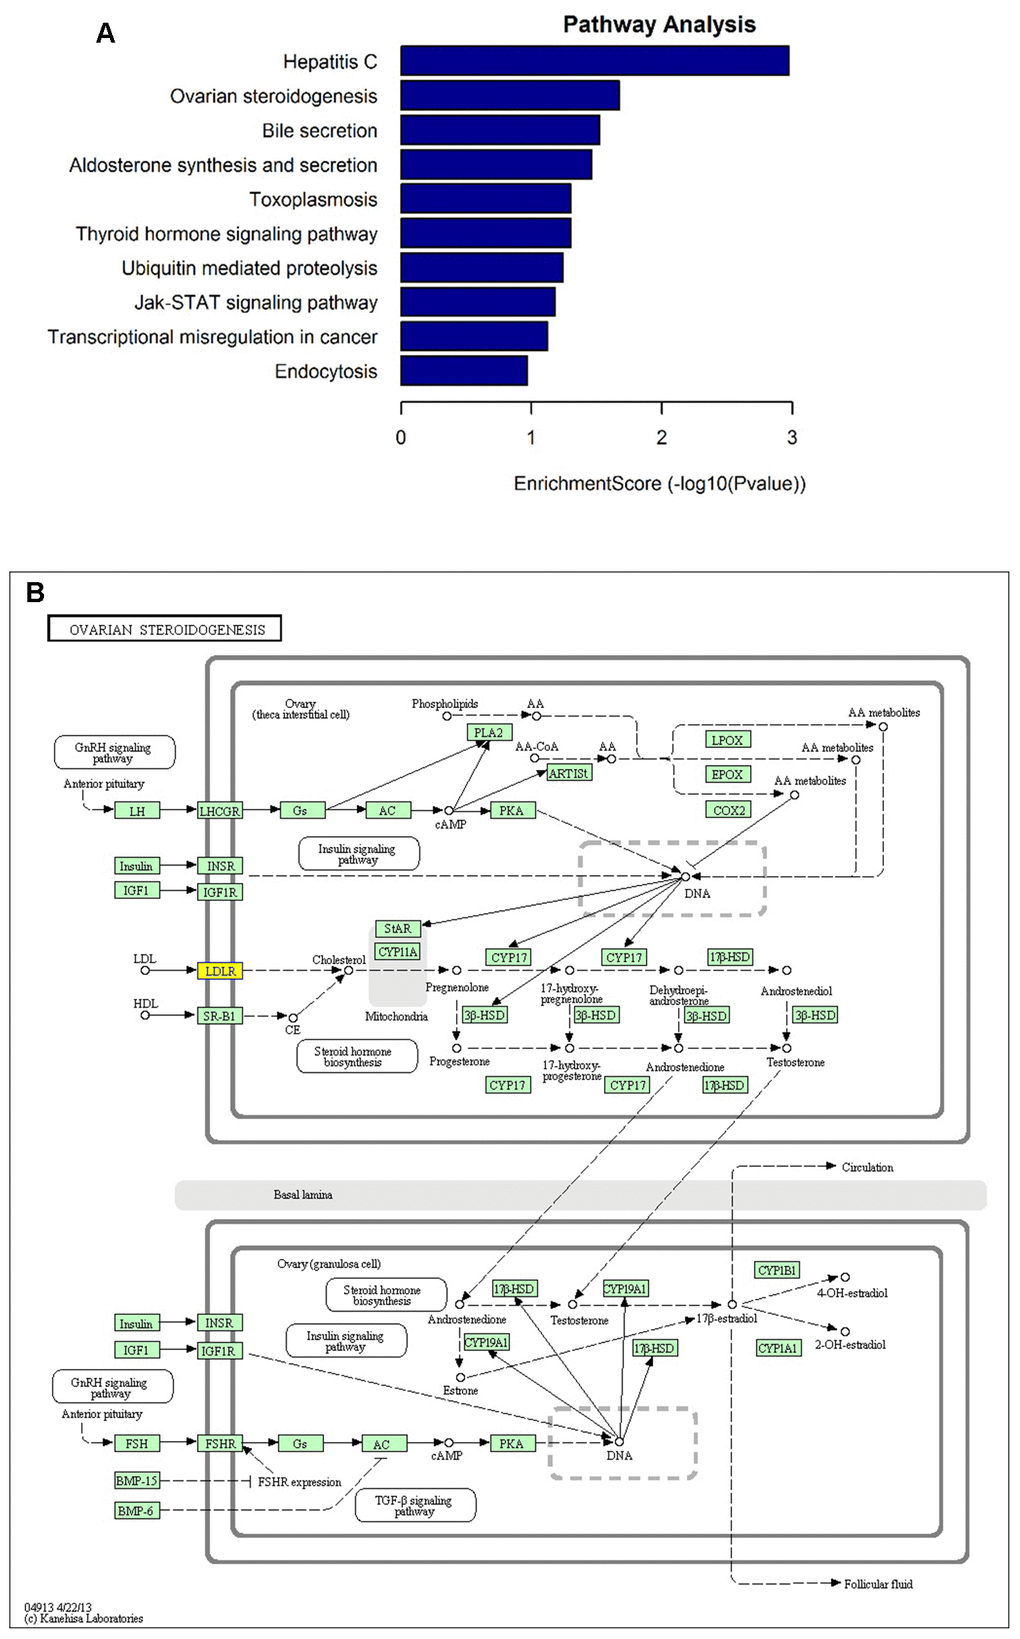 KEGG pathway analysis of the parental genes of differentially expressed circRNA candidates. (A) The most significantly enriched pathways: ovarian steroidogenesis, aldosterone synthesis and secretion, thyroid hormone signaling pathway, ubiquitin mediated proteolysis, Jak-STAT signaling pathway, and endocytosis. (B) The diagrammatic sketch of ovarian steroidogenesis pathway in which circLDLR (hsa